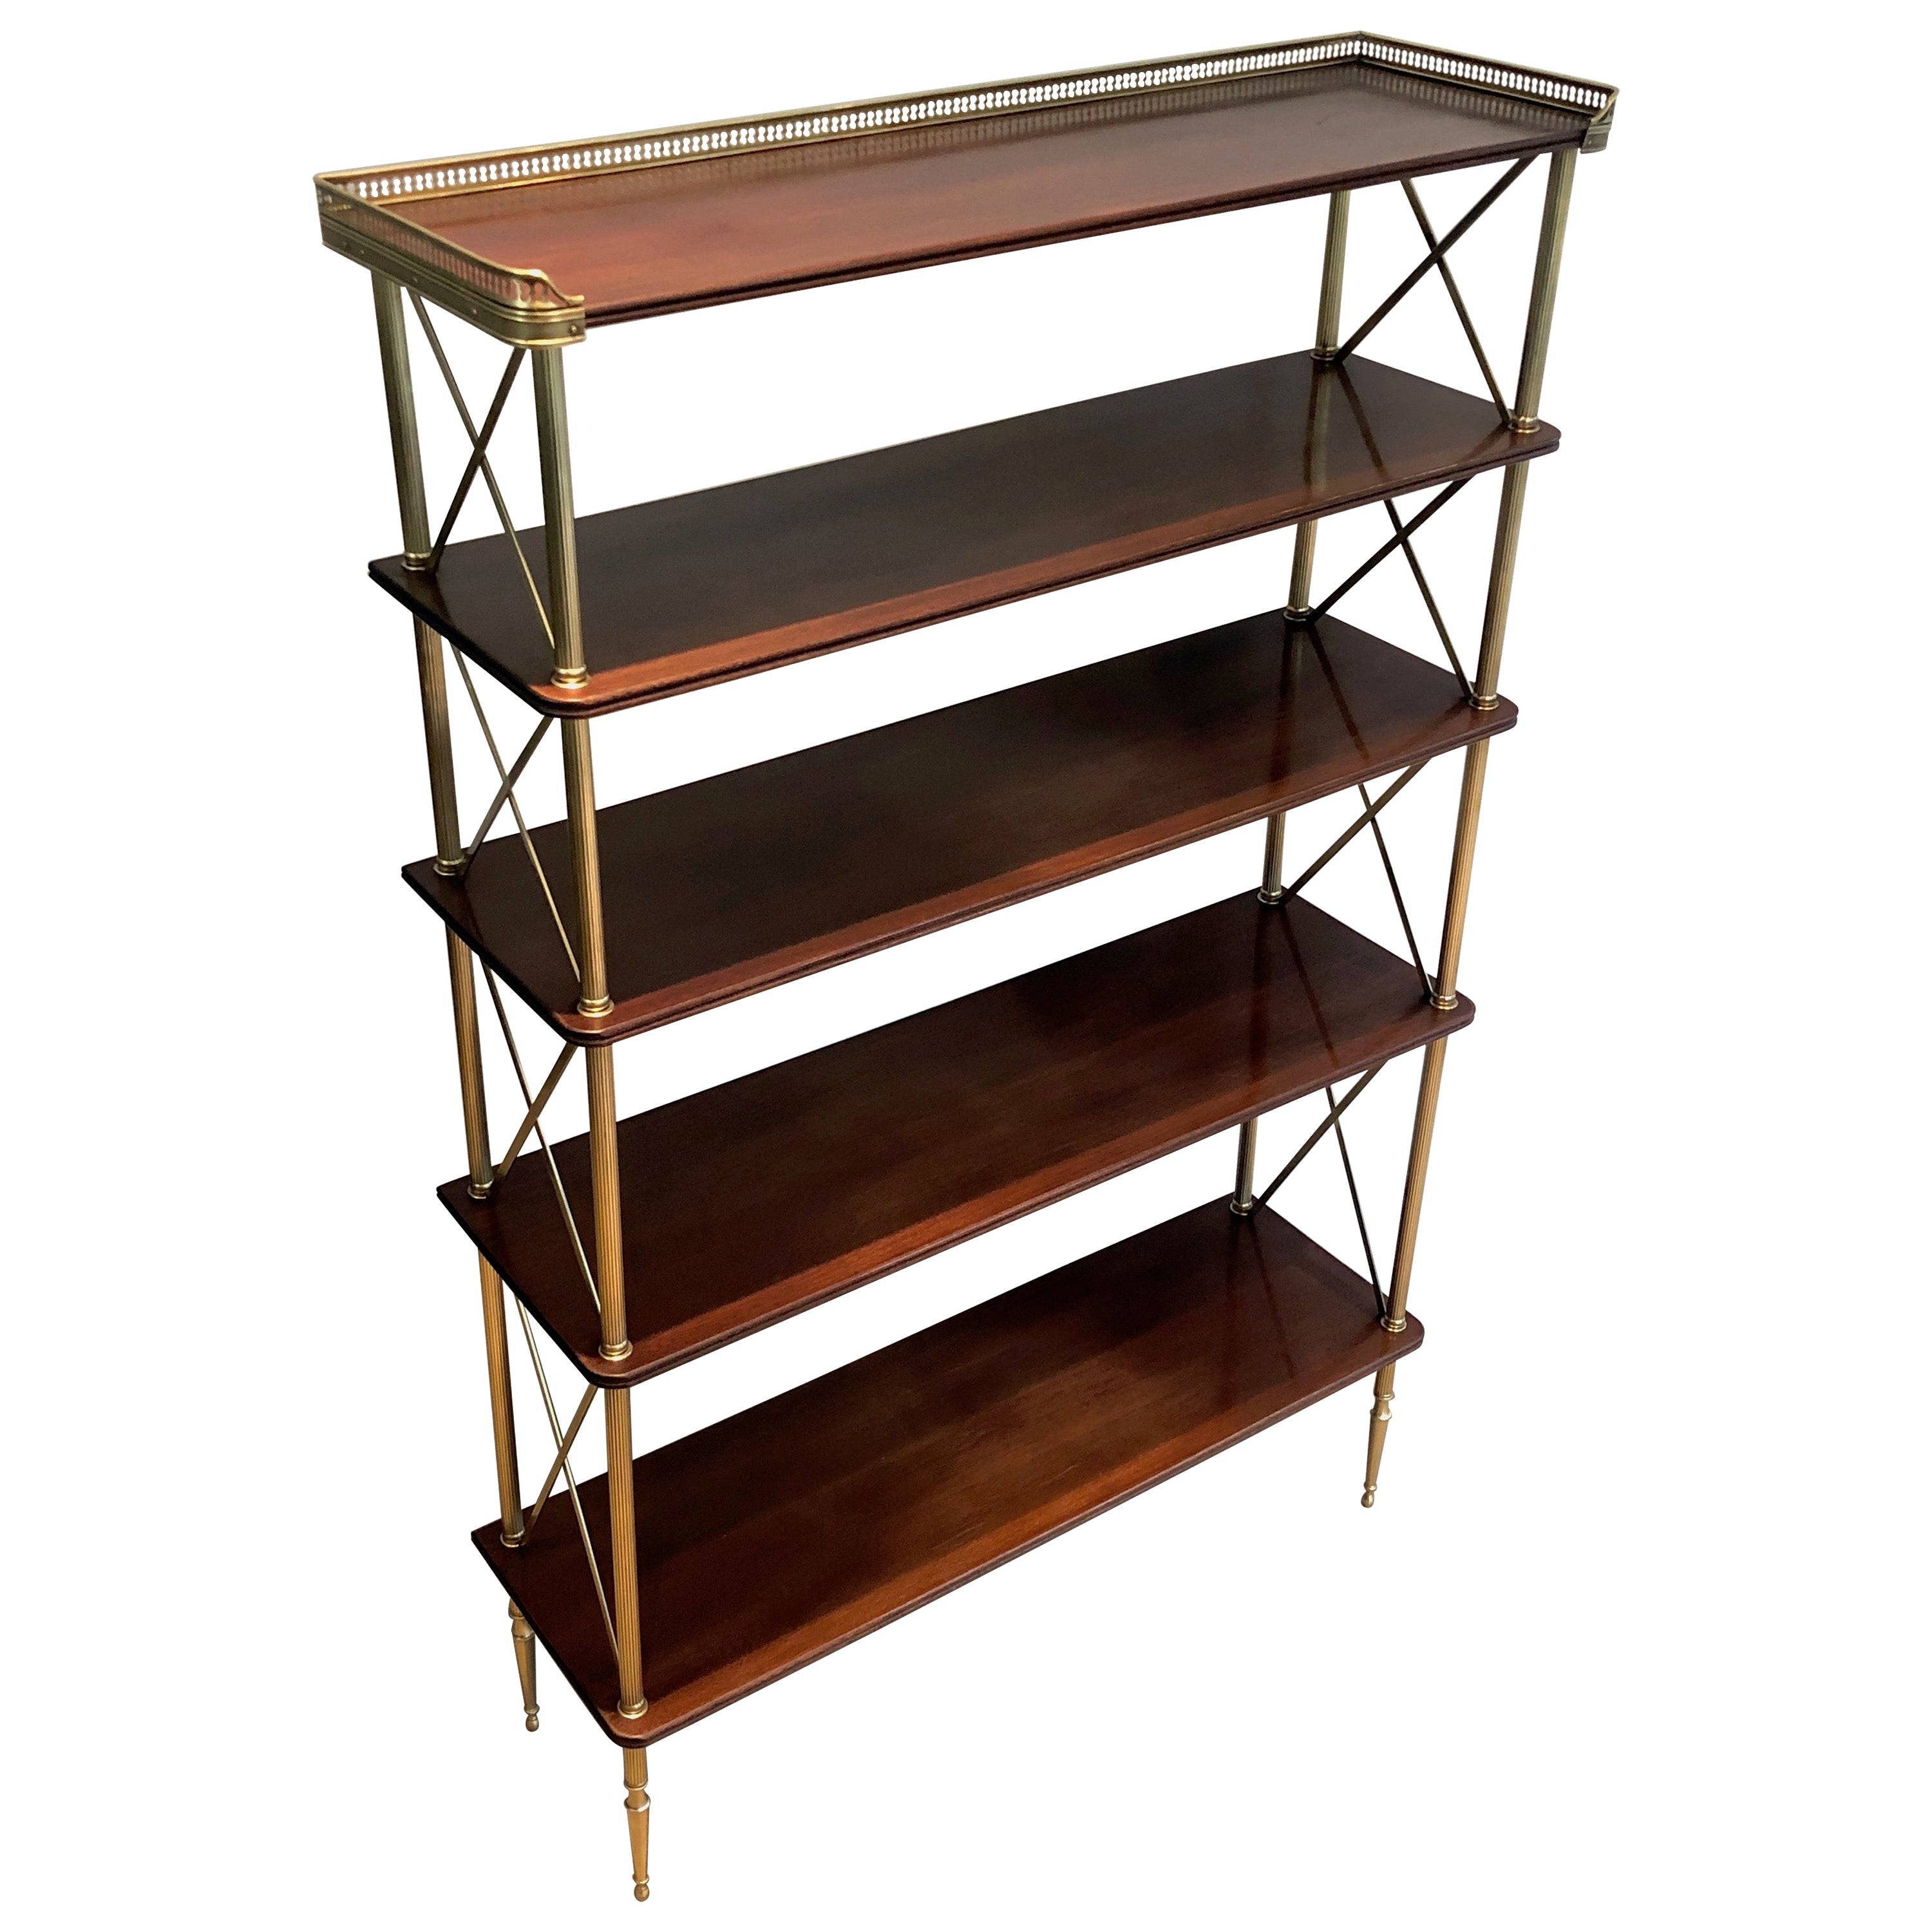 Mahogany and Brass Shelves Unit Attributed to Maison Jansen, Circa 1940